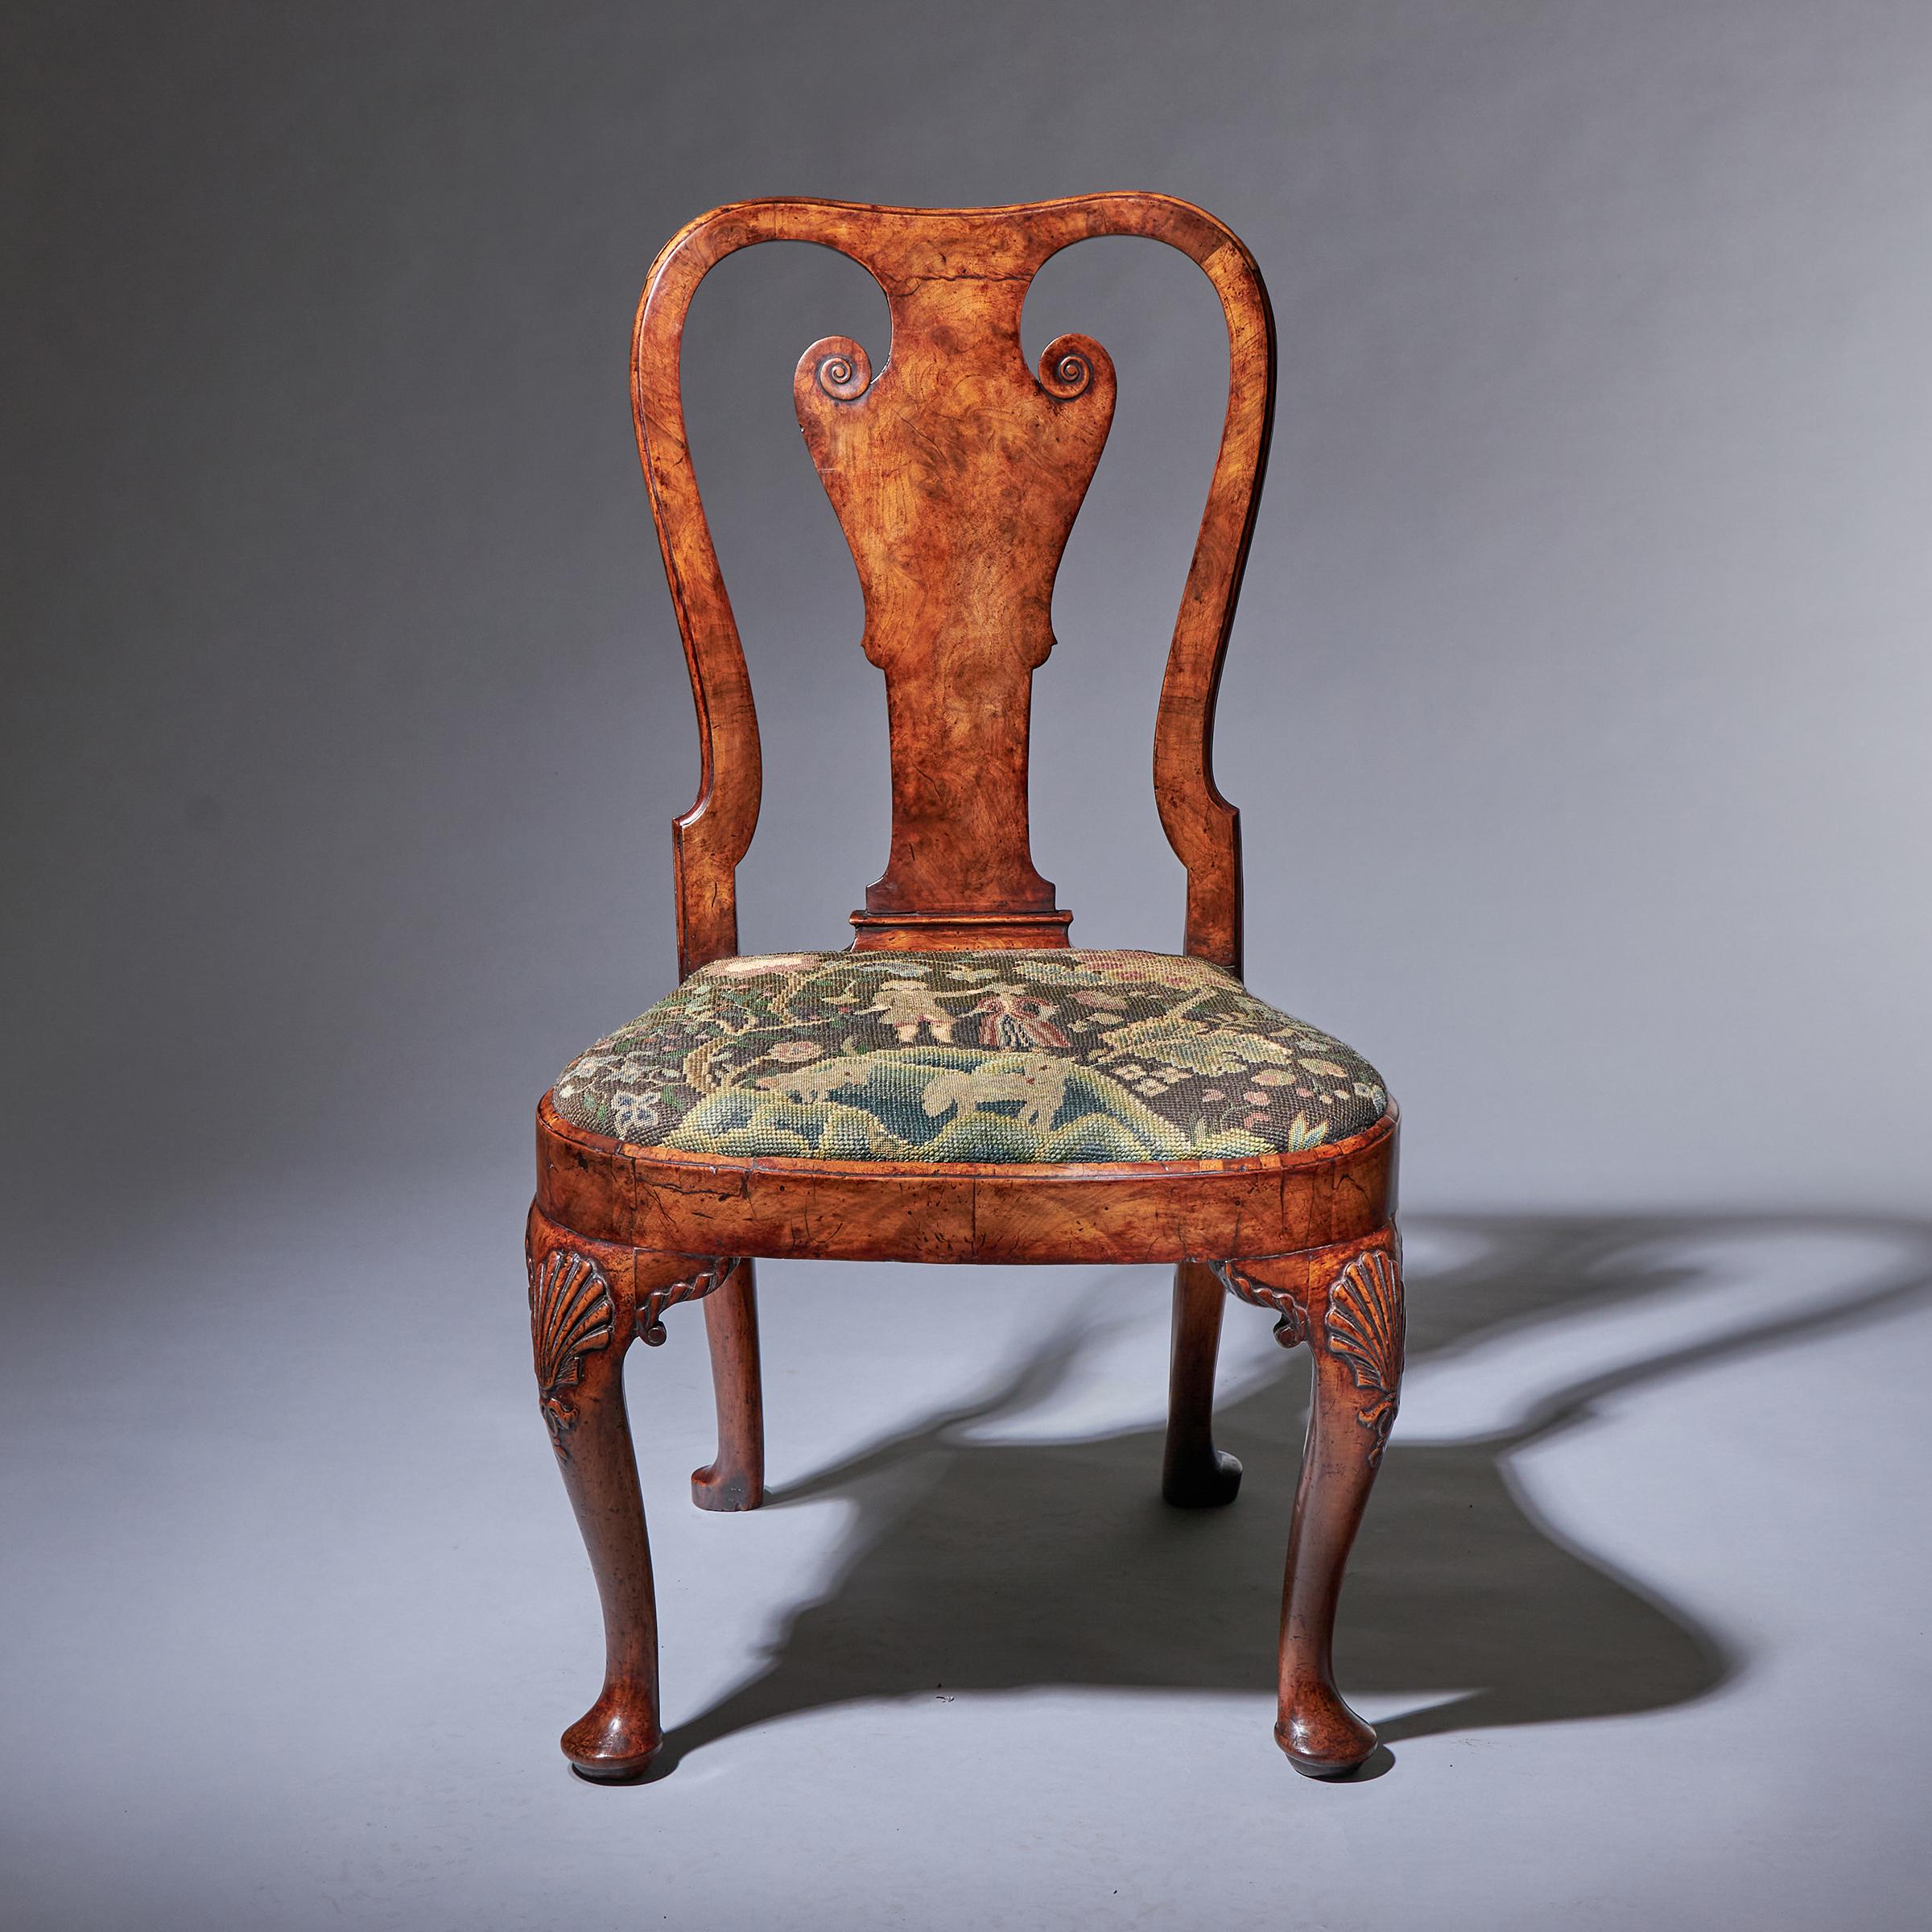 A superb early 18th-century George I carved walnut chair, circa 1720. England 

The figured walnut volute carved violin splat terminates to a fixed moulded shoe and is most elegantly flanked by cascading s-scroll styles. The bell-shaped seat is